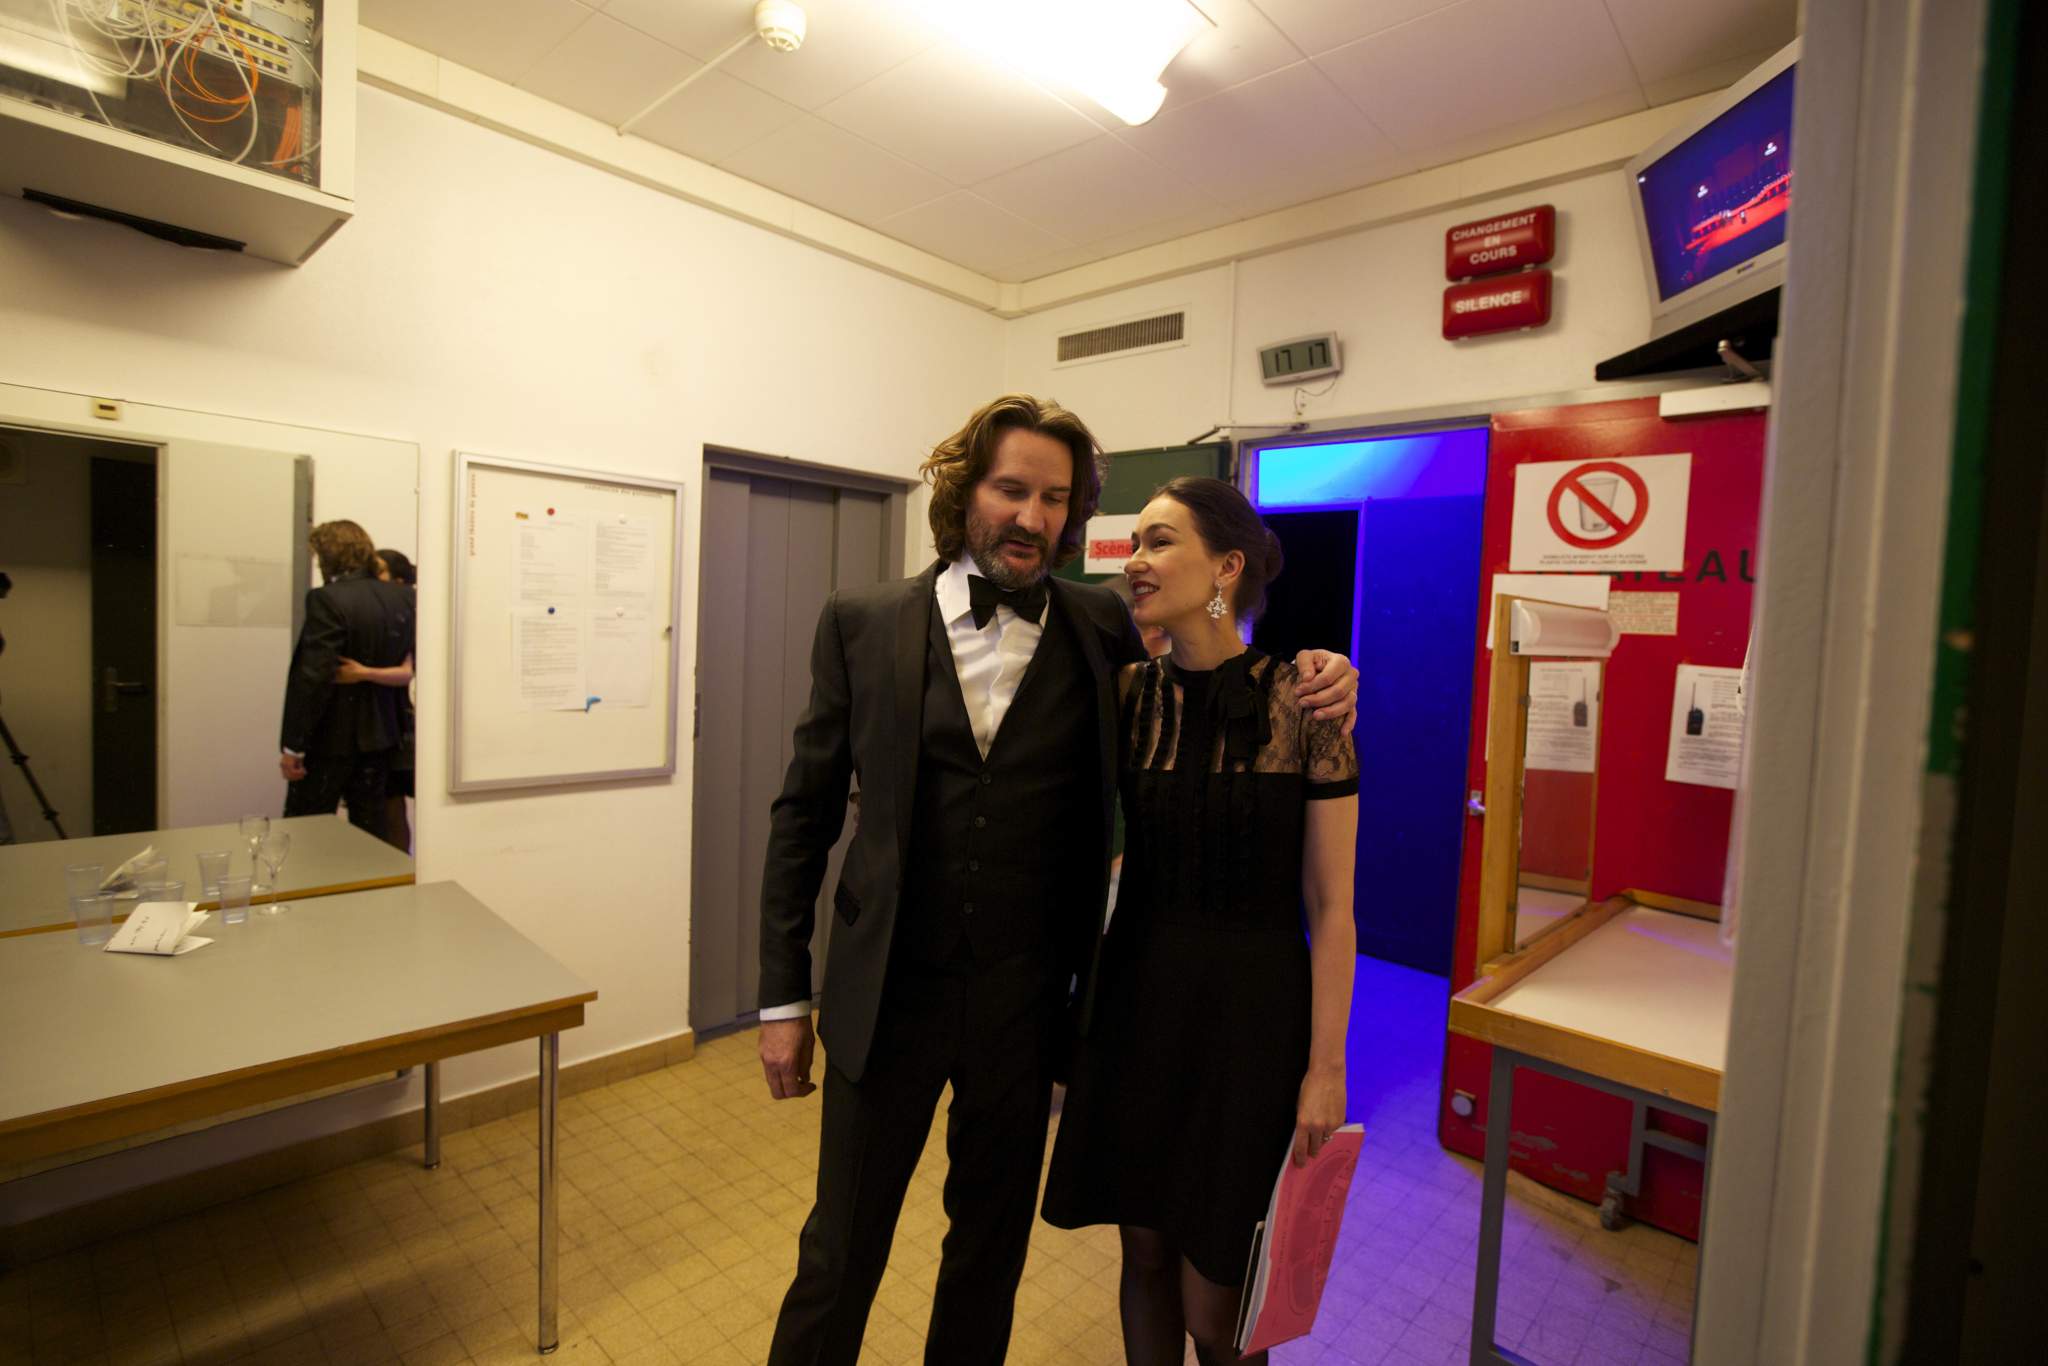 Frédéric Beigbeder (MC of the prize-giving ceremony of the GPHG 2015) and Carine Maillard (Director of the Foundation of the GPHG)